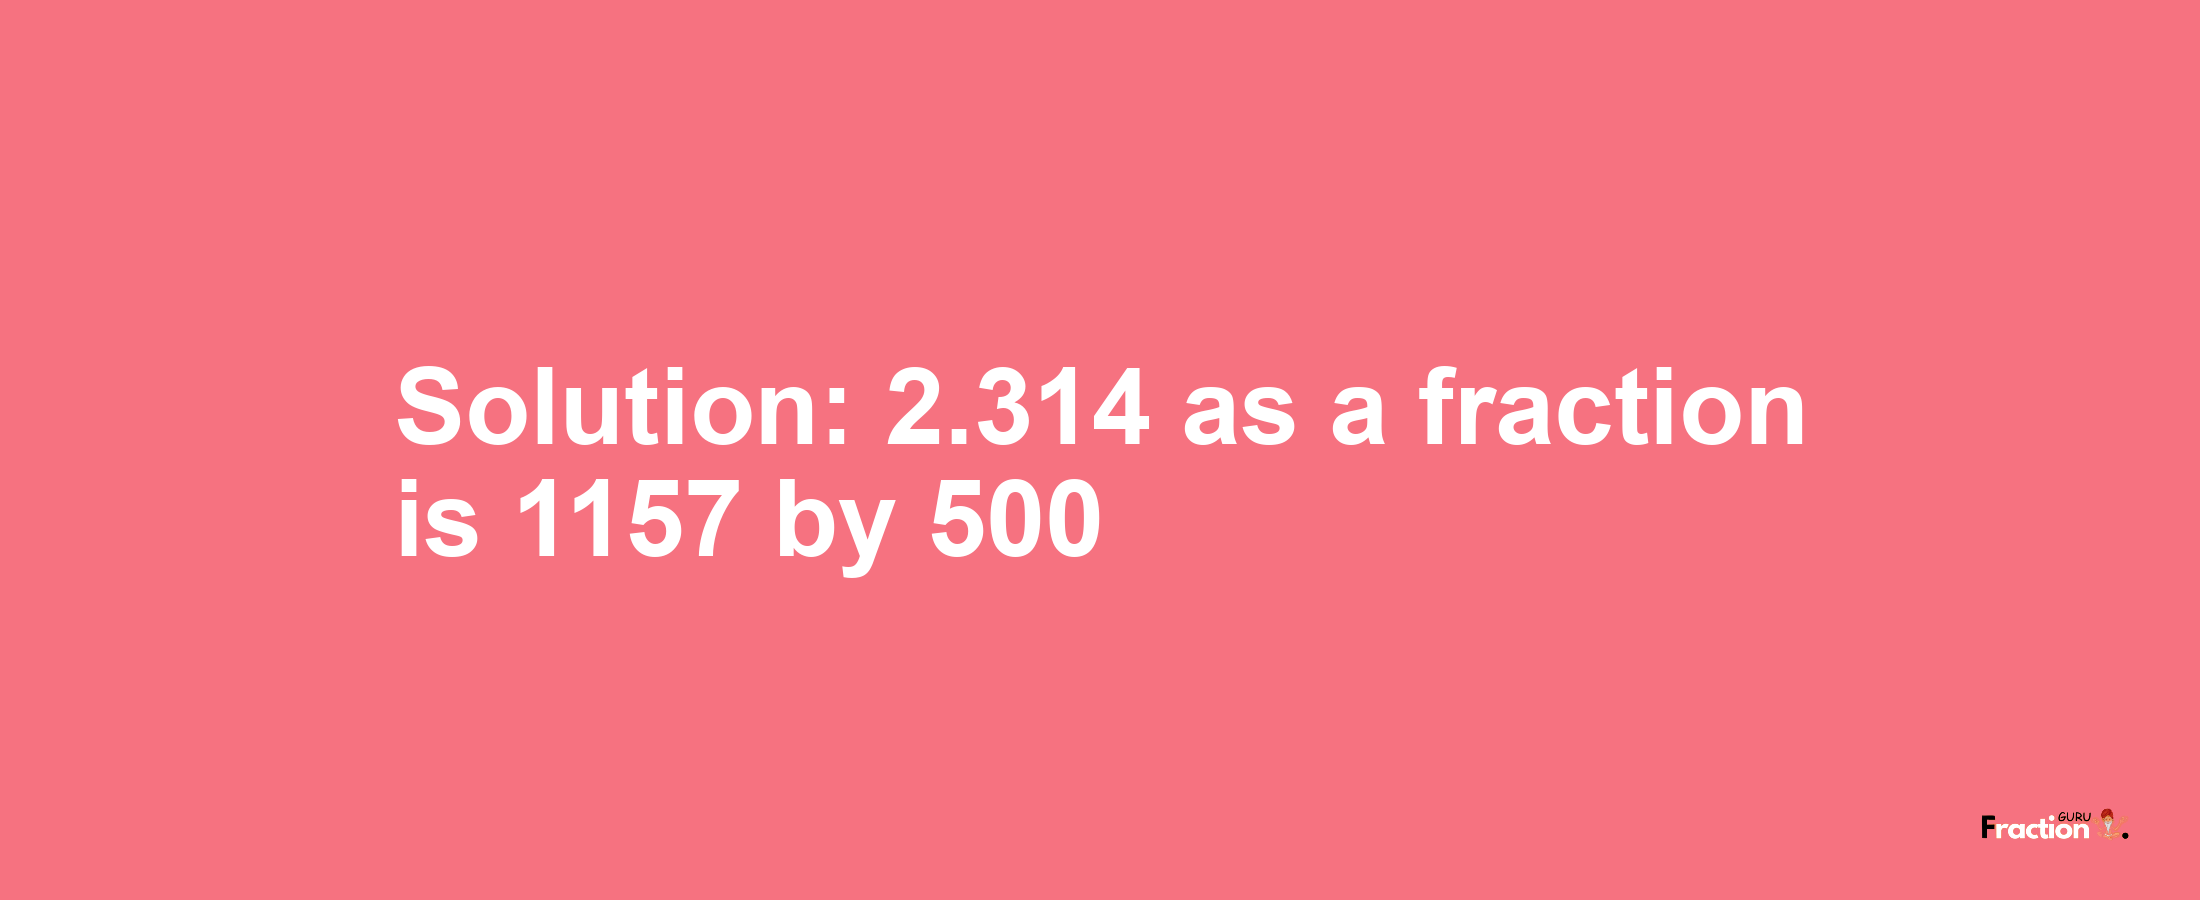 Solution:2.314 as a fraction is 1157/500